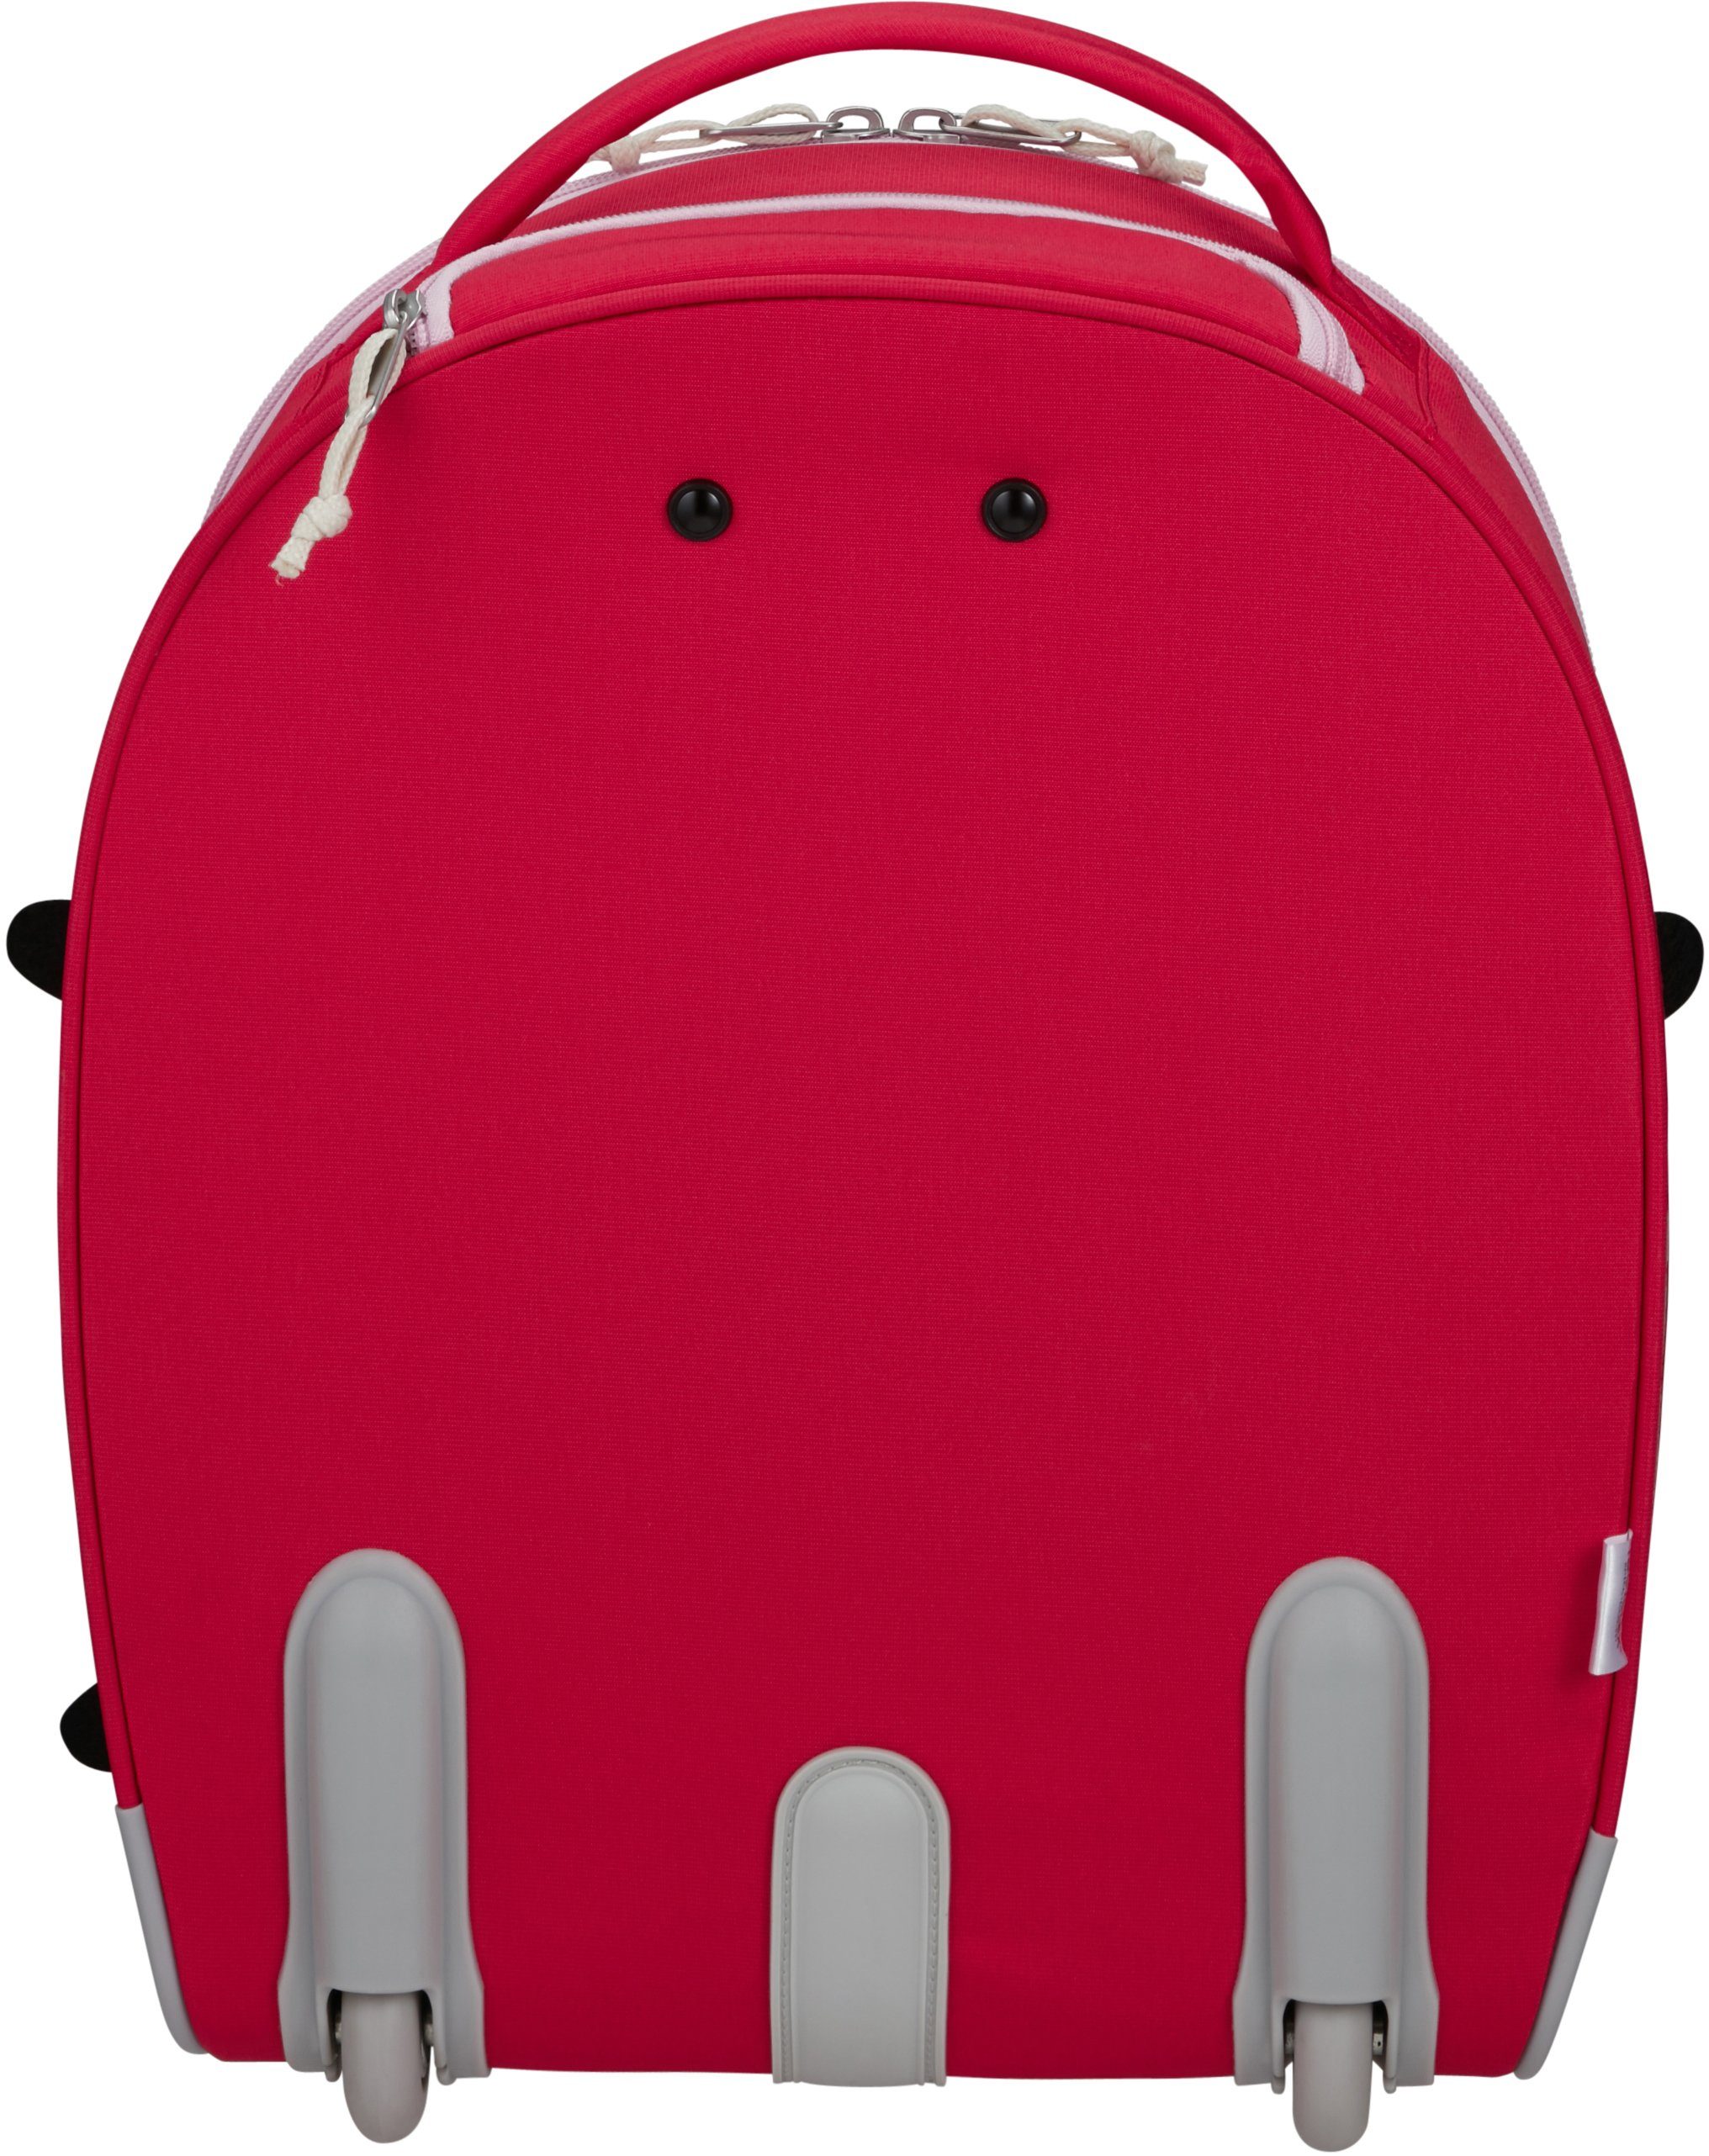 Sammies Ladybug recyceltem ECO, Kinderkoffer 2 Rollen, Material Happy Lally, aus Samsonite